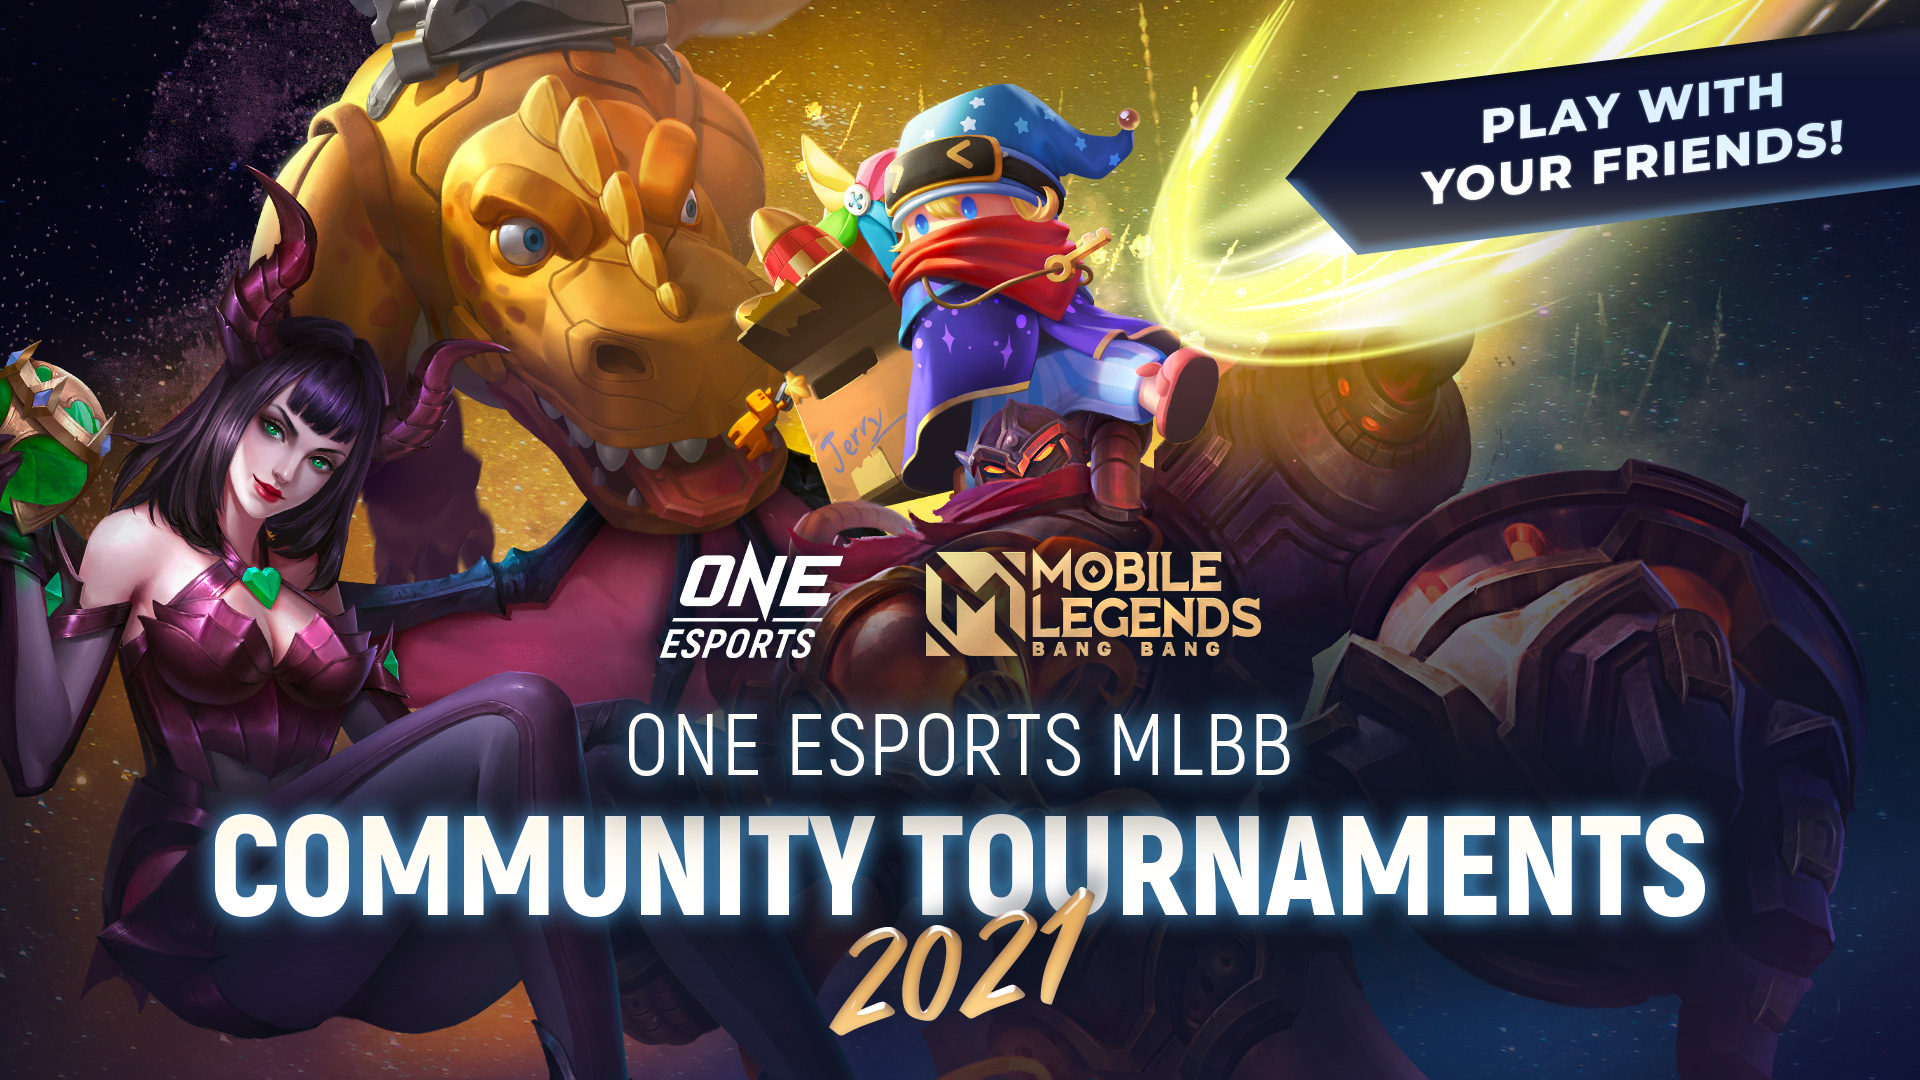 Win prize money, Diamonds, and Skins in the ONE Esports MLBB Community Tournaments ONE Esports